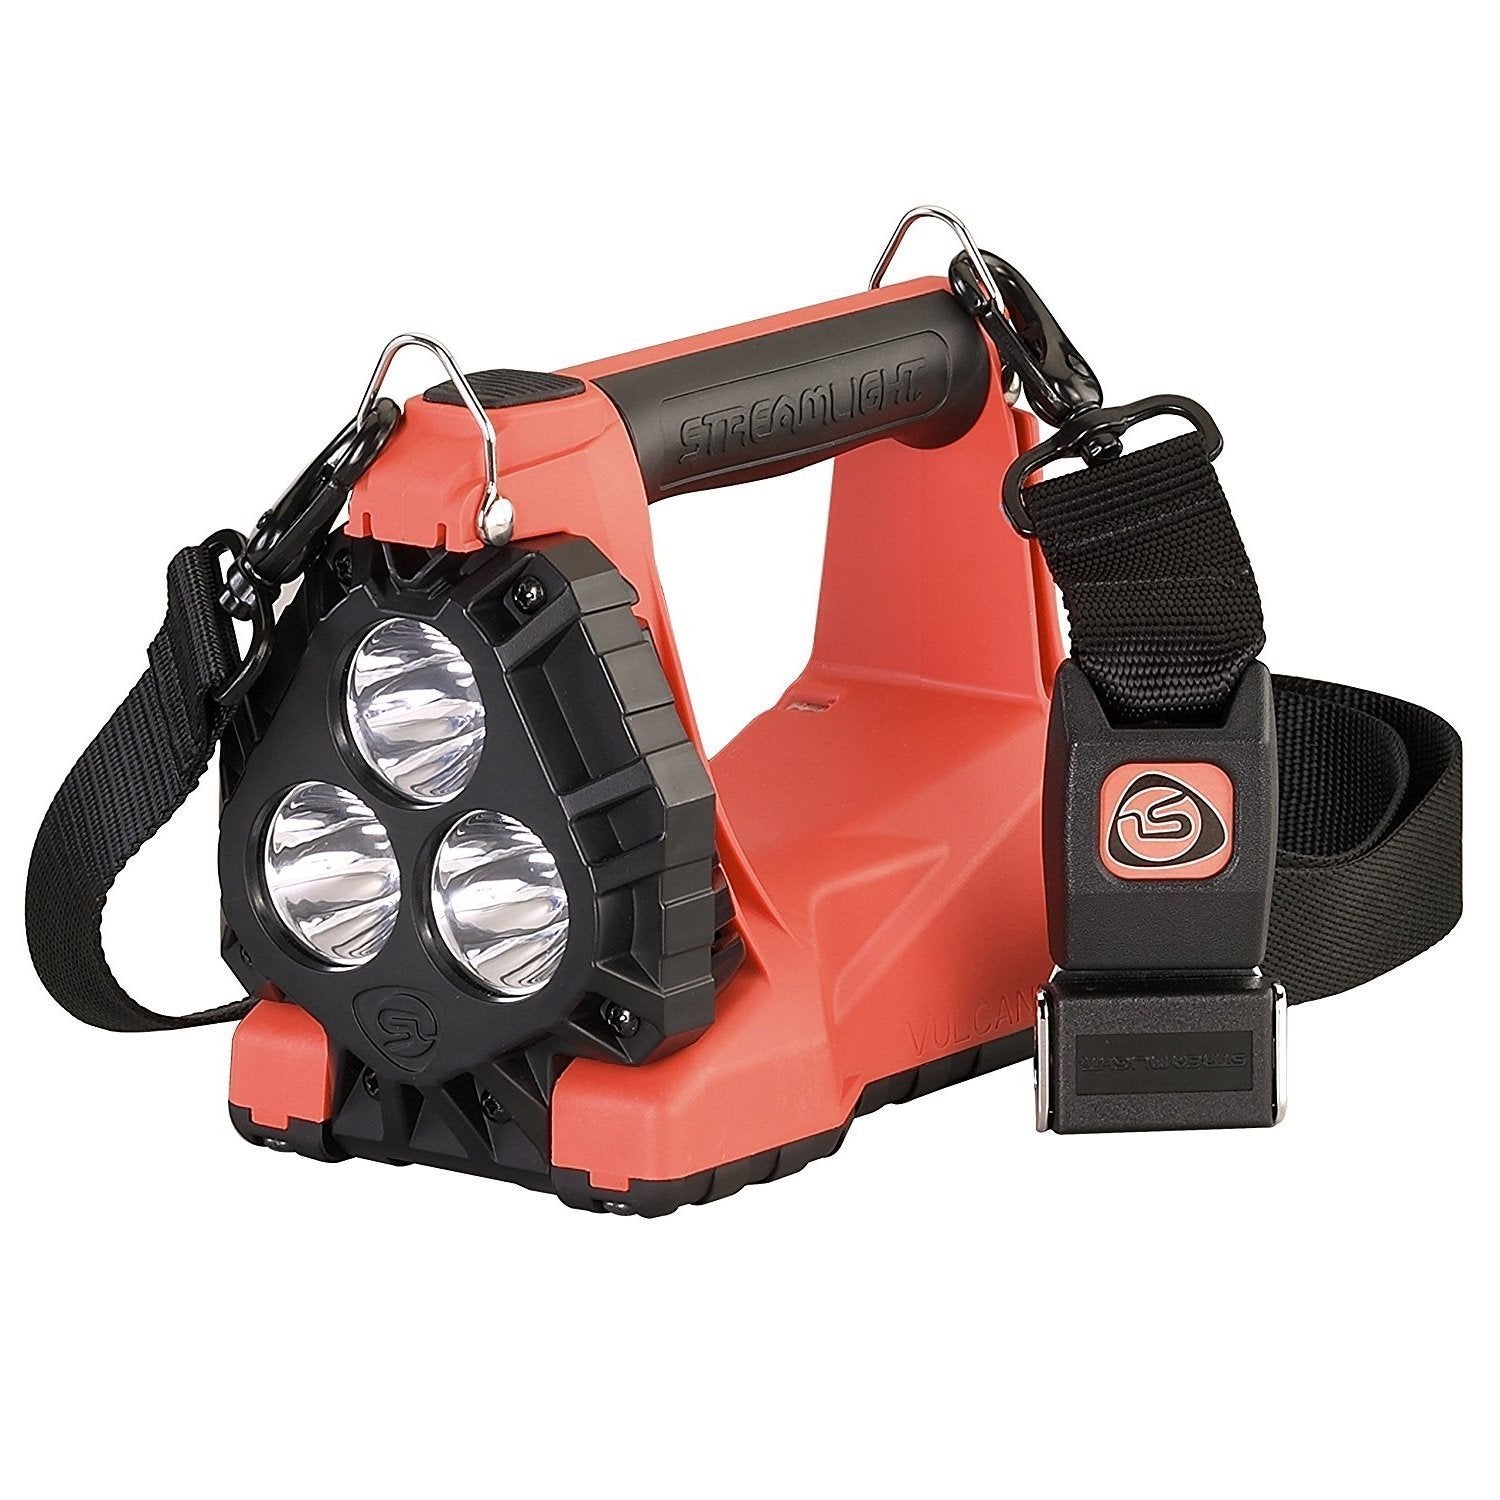 Streamlight Vulcan 180 with Charger 120V/DC Flashlights and Lighting Streamlight Orange Tactical Gear Supplier Tactical Distributors Australia